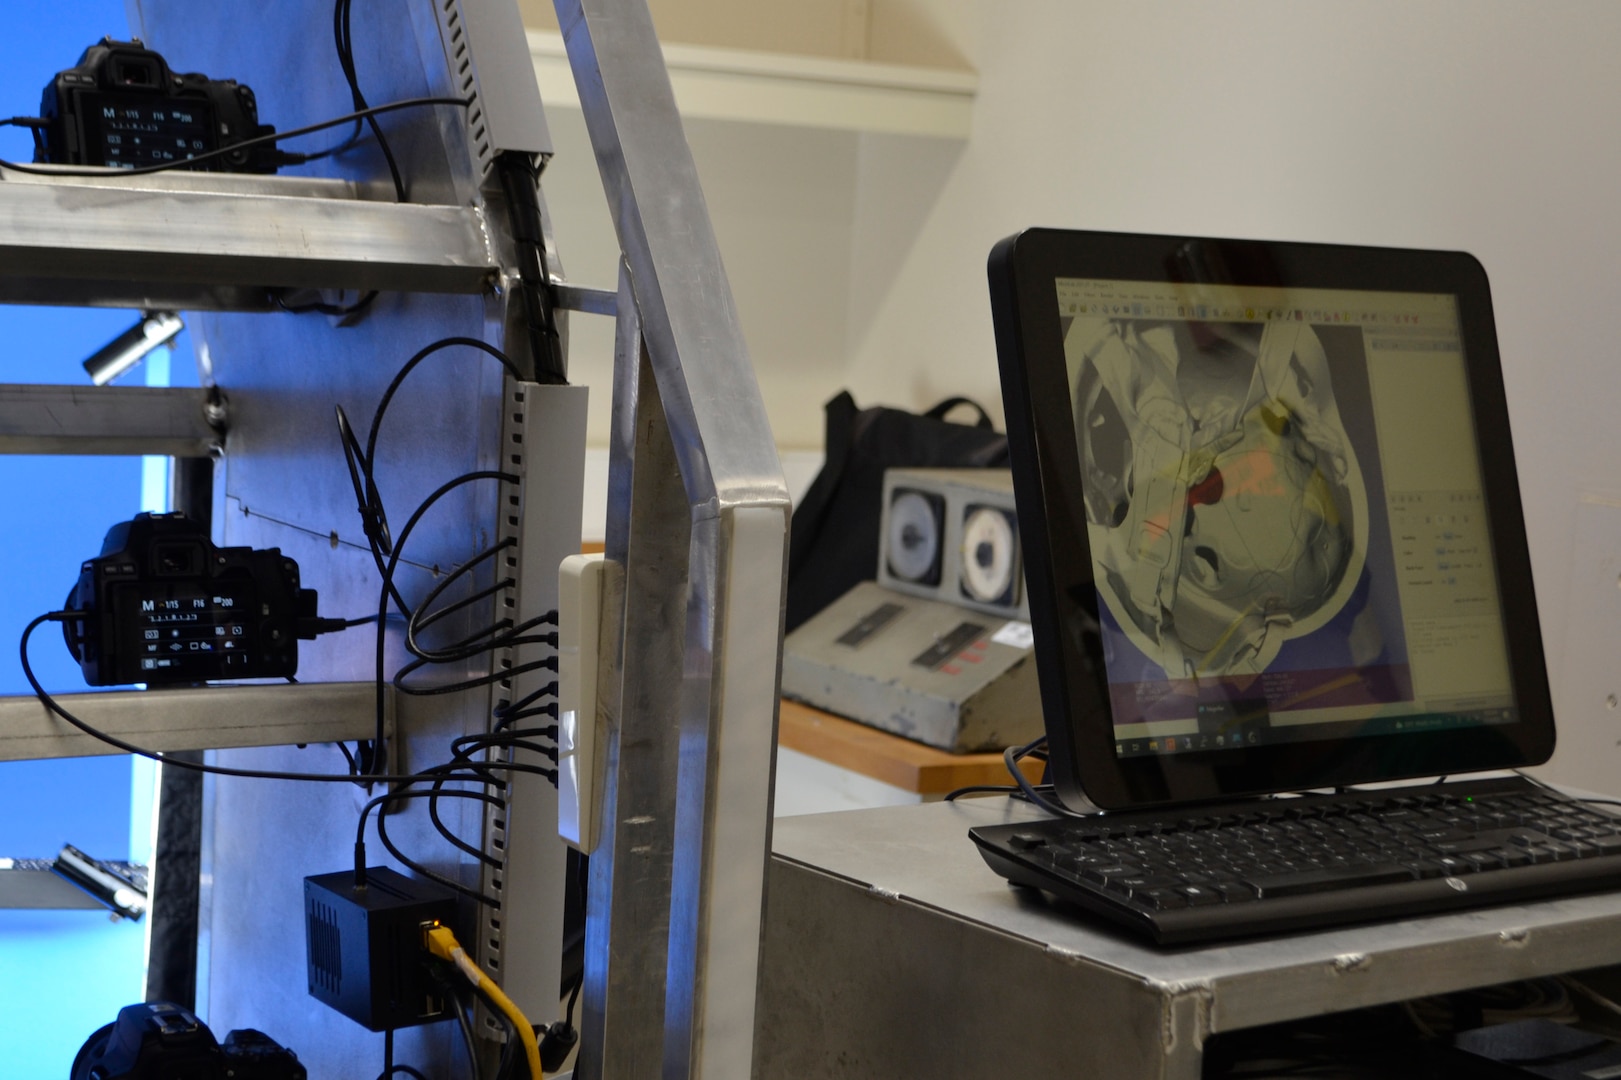 A computer screen on the right of the photo displays a 3D model of a military helmet. To the left, a large rack holds several cameras that make up a portion of a 3D scanning system.